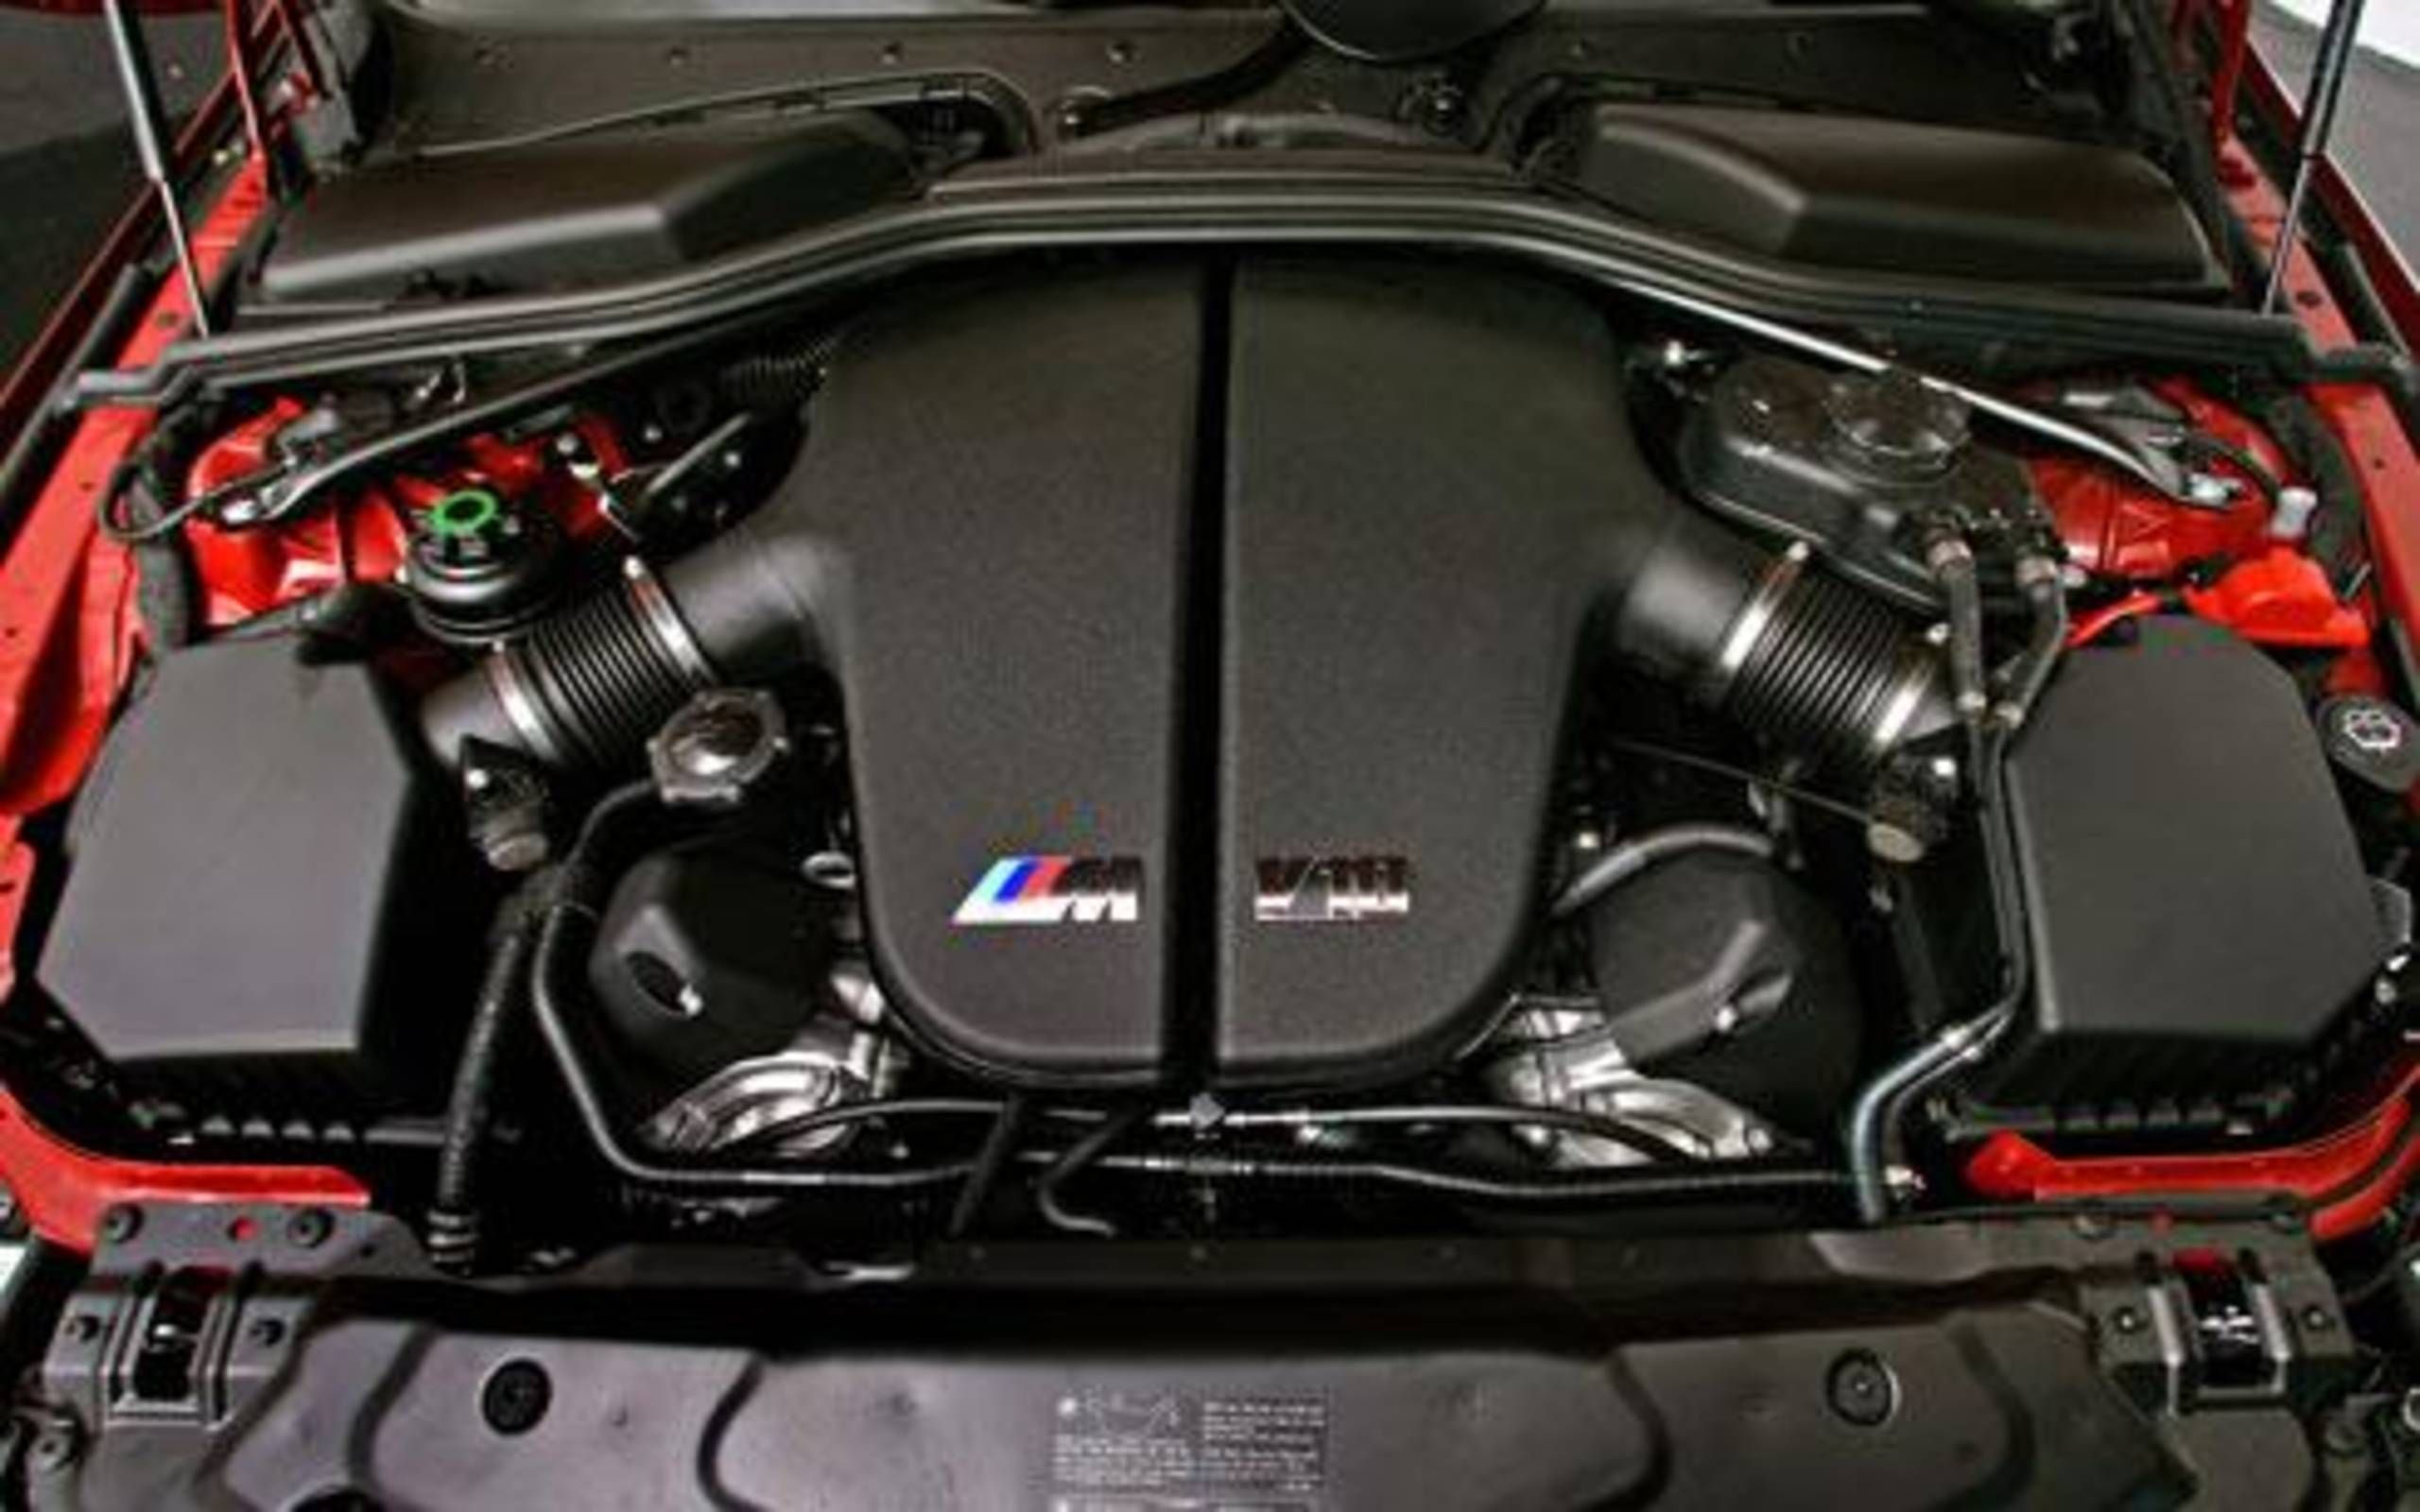 2006 BMW M5: Still King: Latest M5 conquers all, regardless of